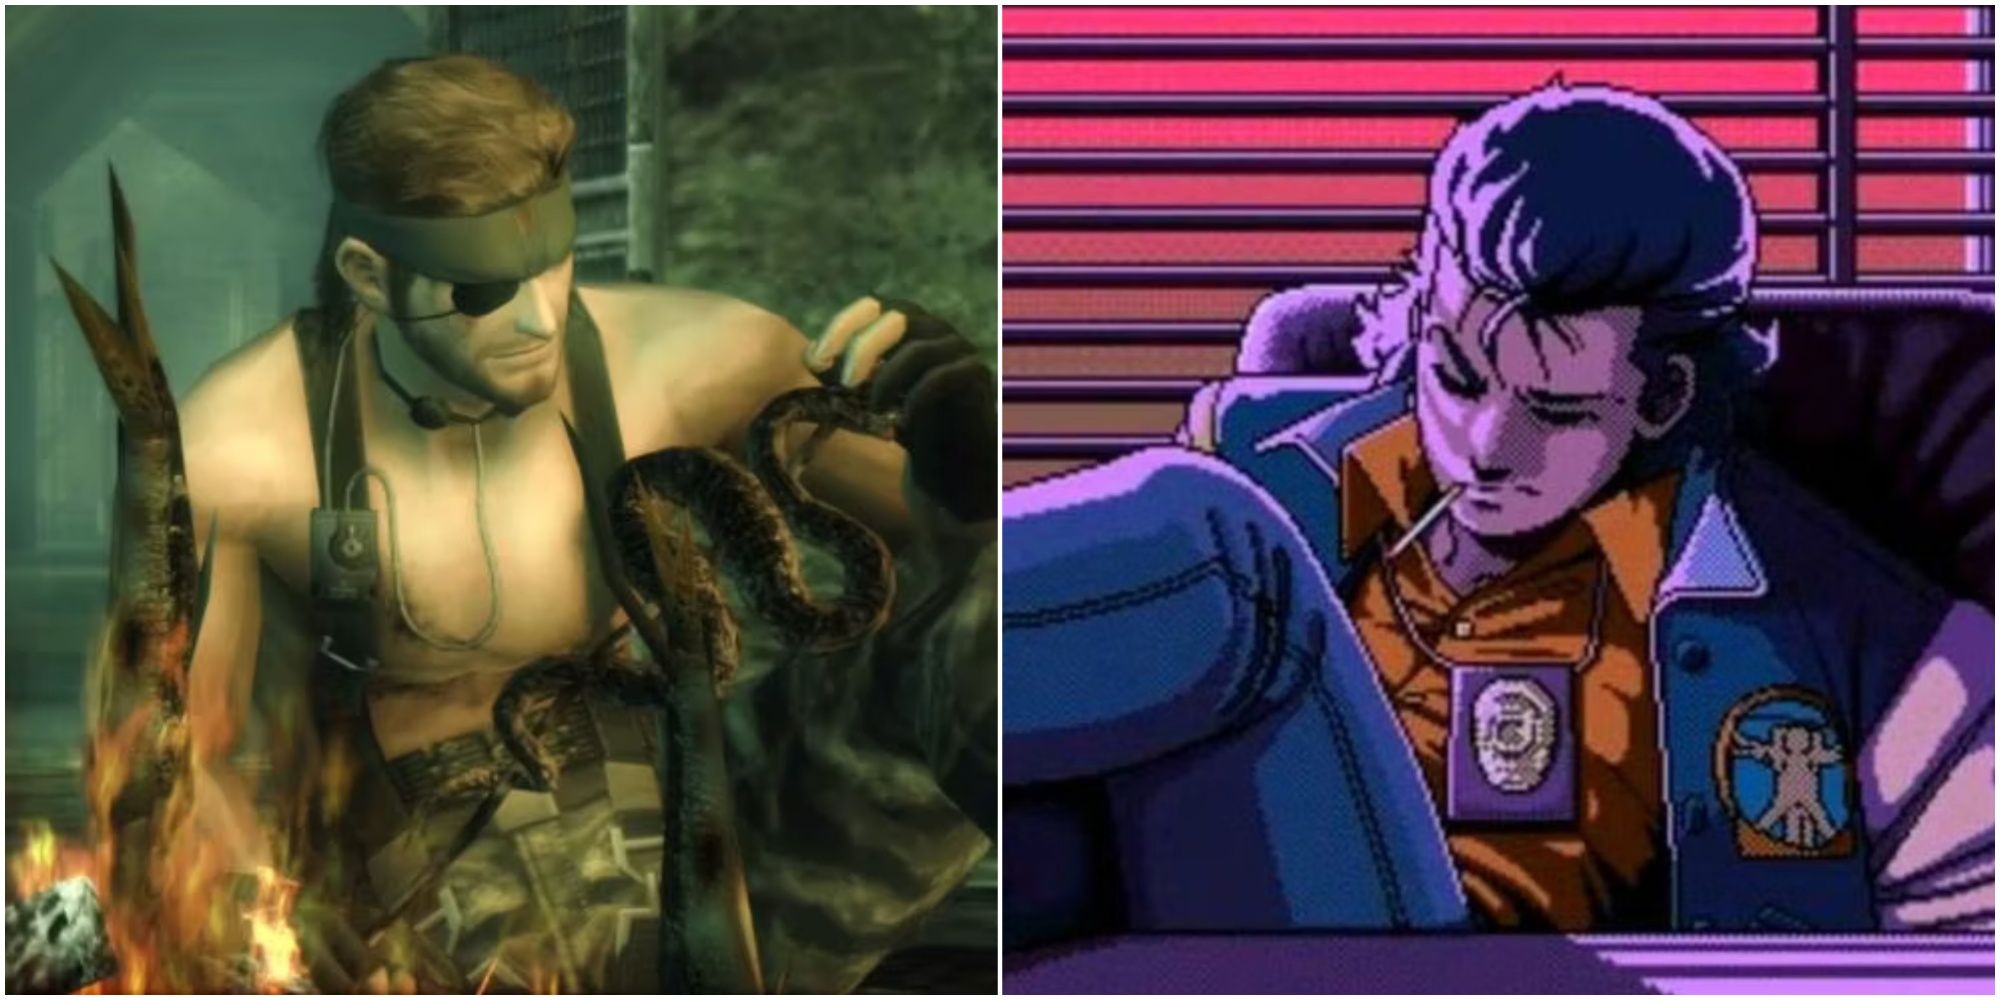 Metal Gear Solid 3 and Policenauts